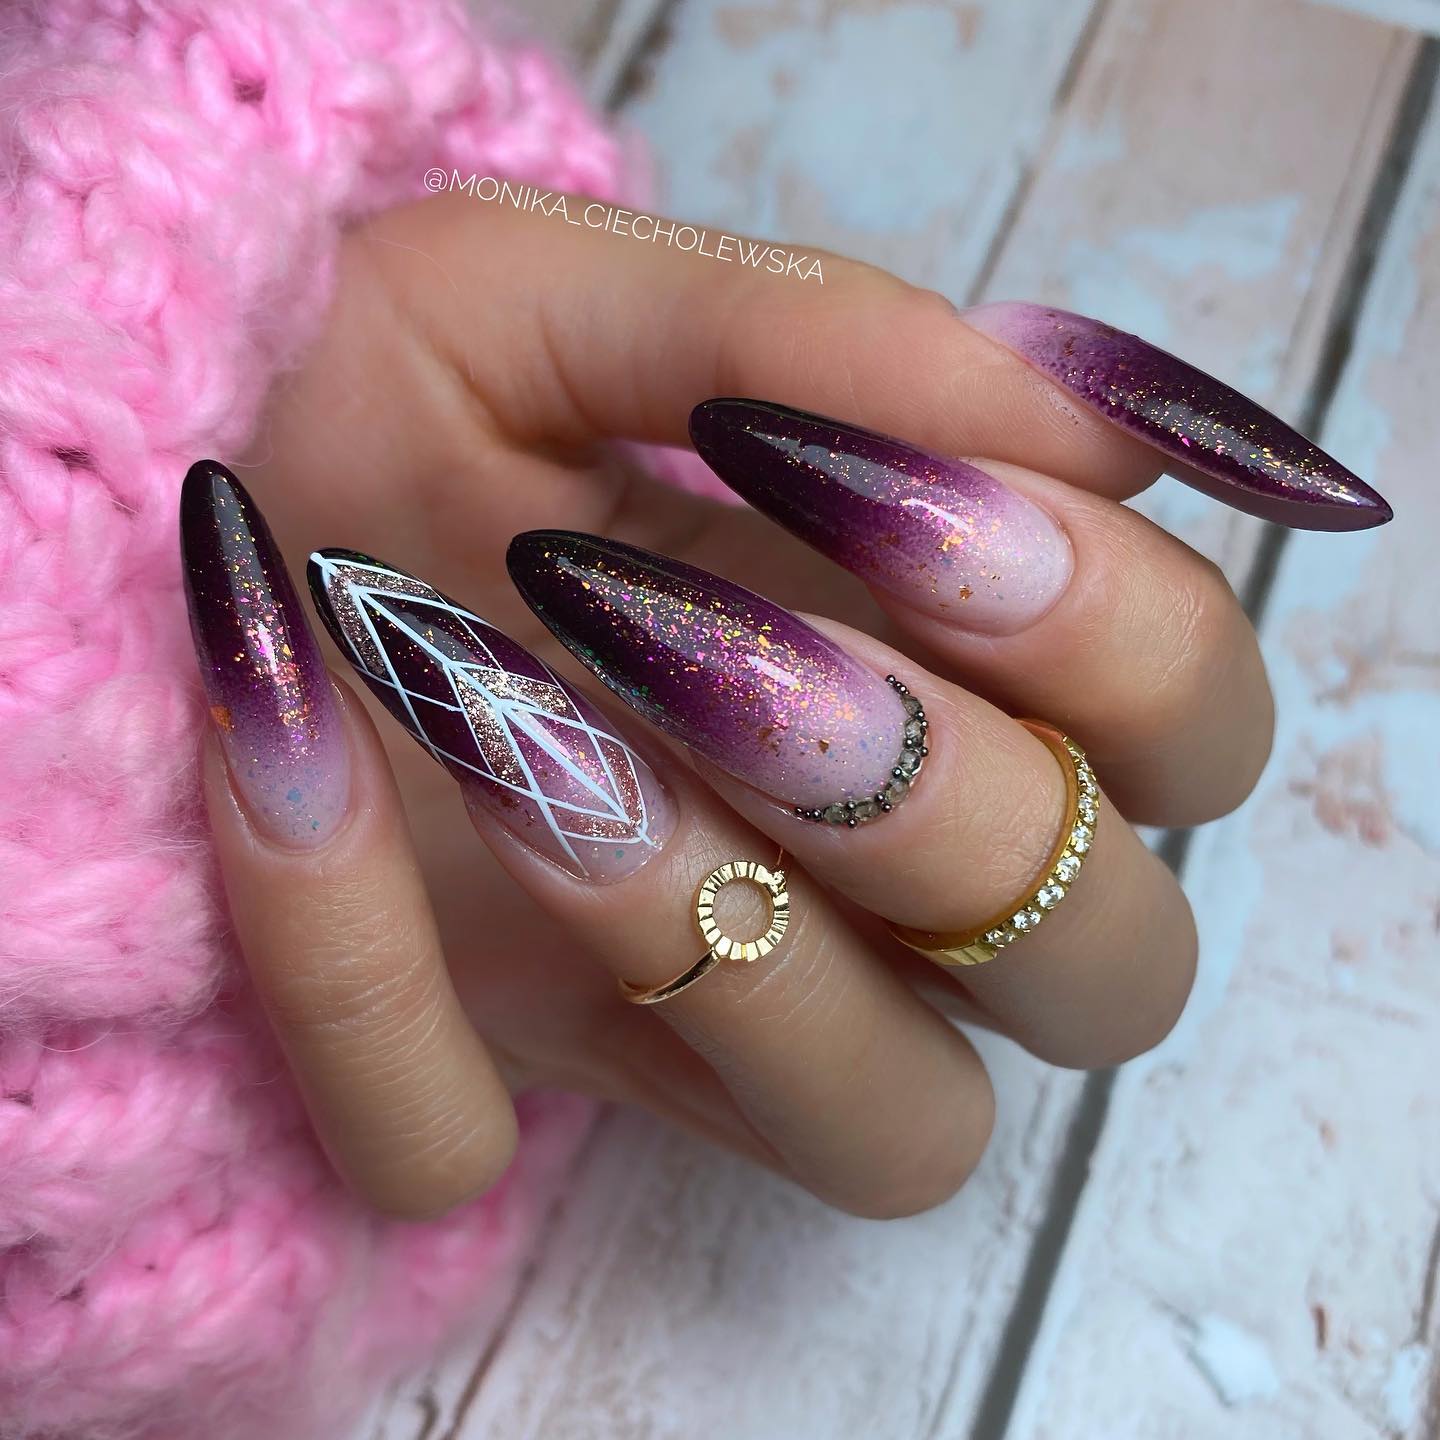 Long Ombre Burgundy Nails with White Lines and Glitter